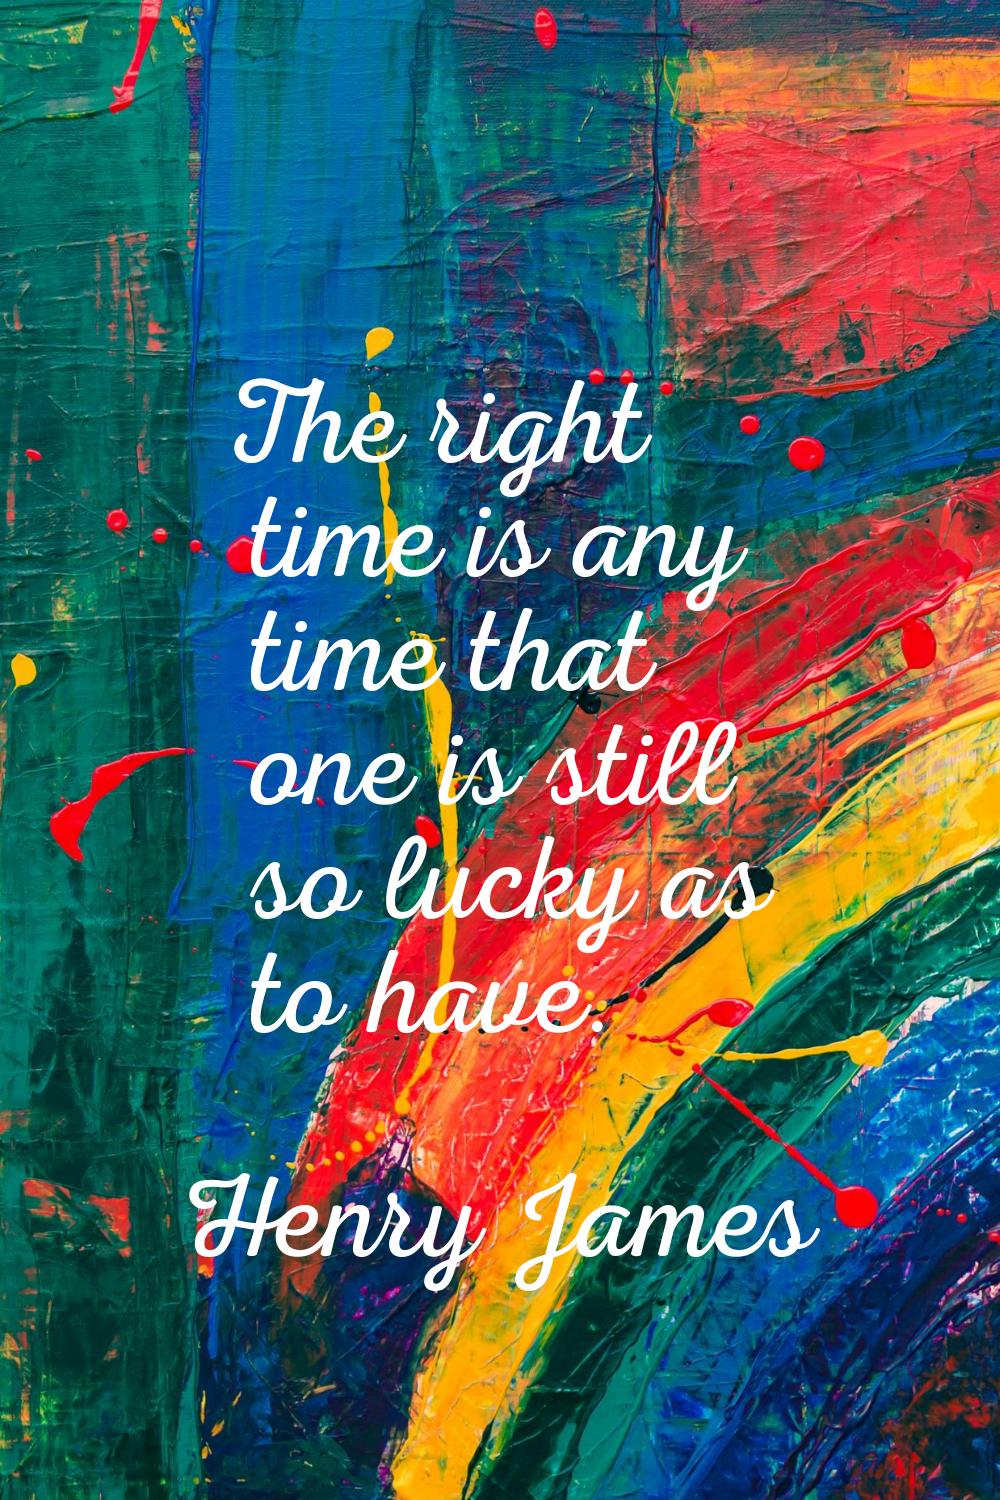 The right time is any time that one is still so lucky as to have.